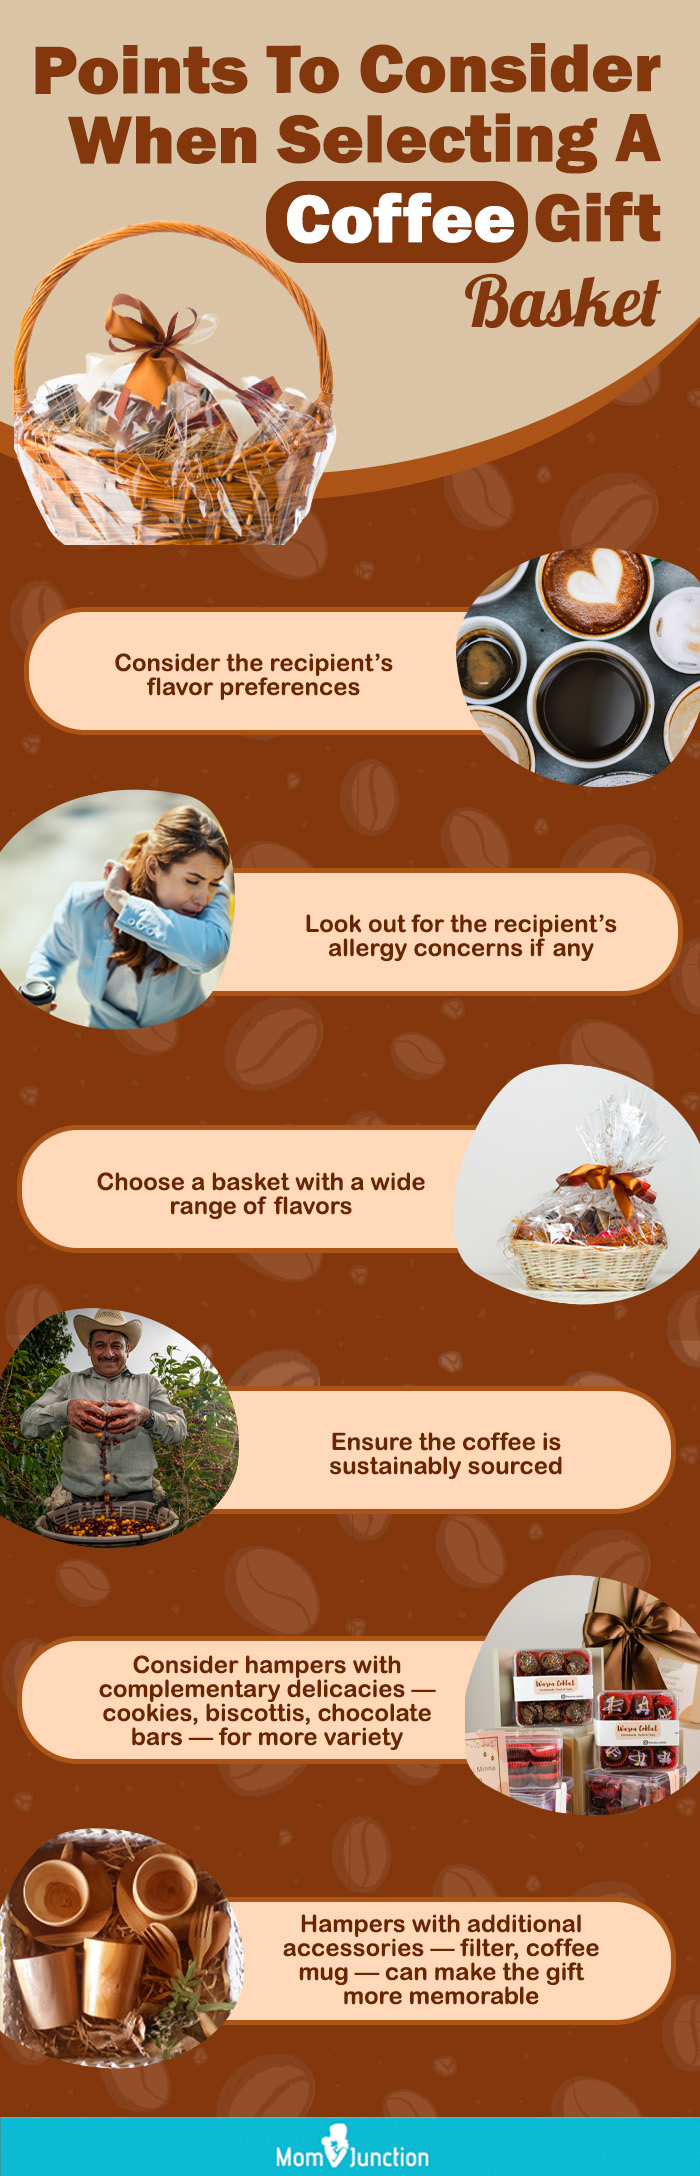 Points To Consider When Selecting A Coffee Gift Basket (Infographic)